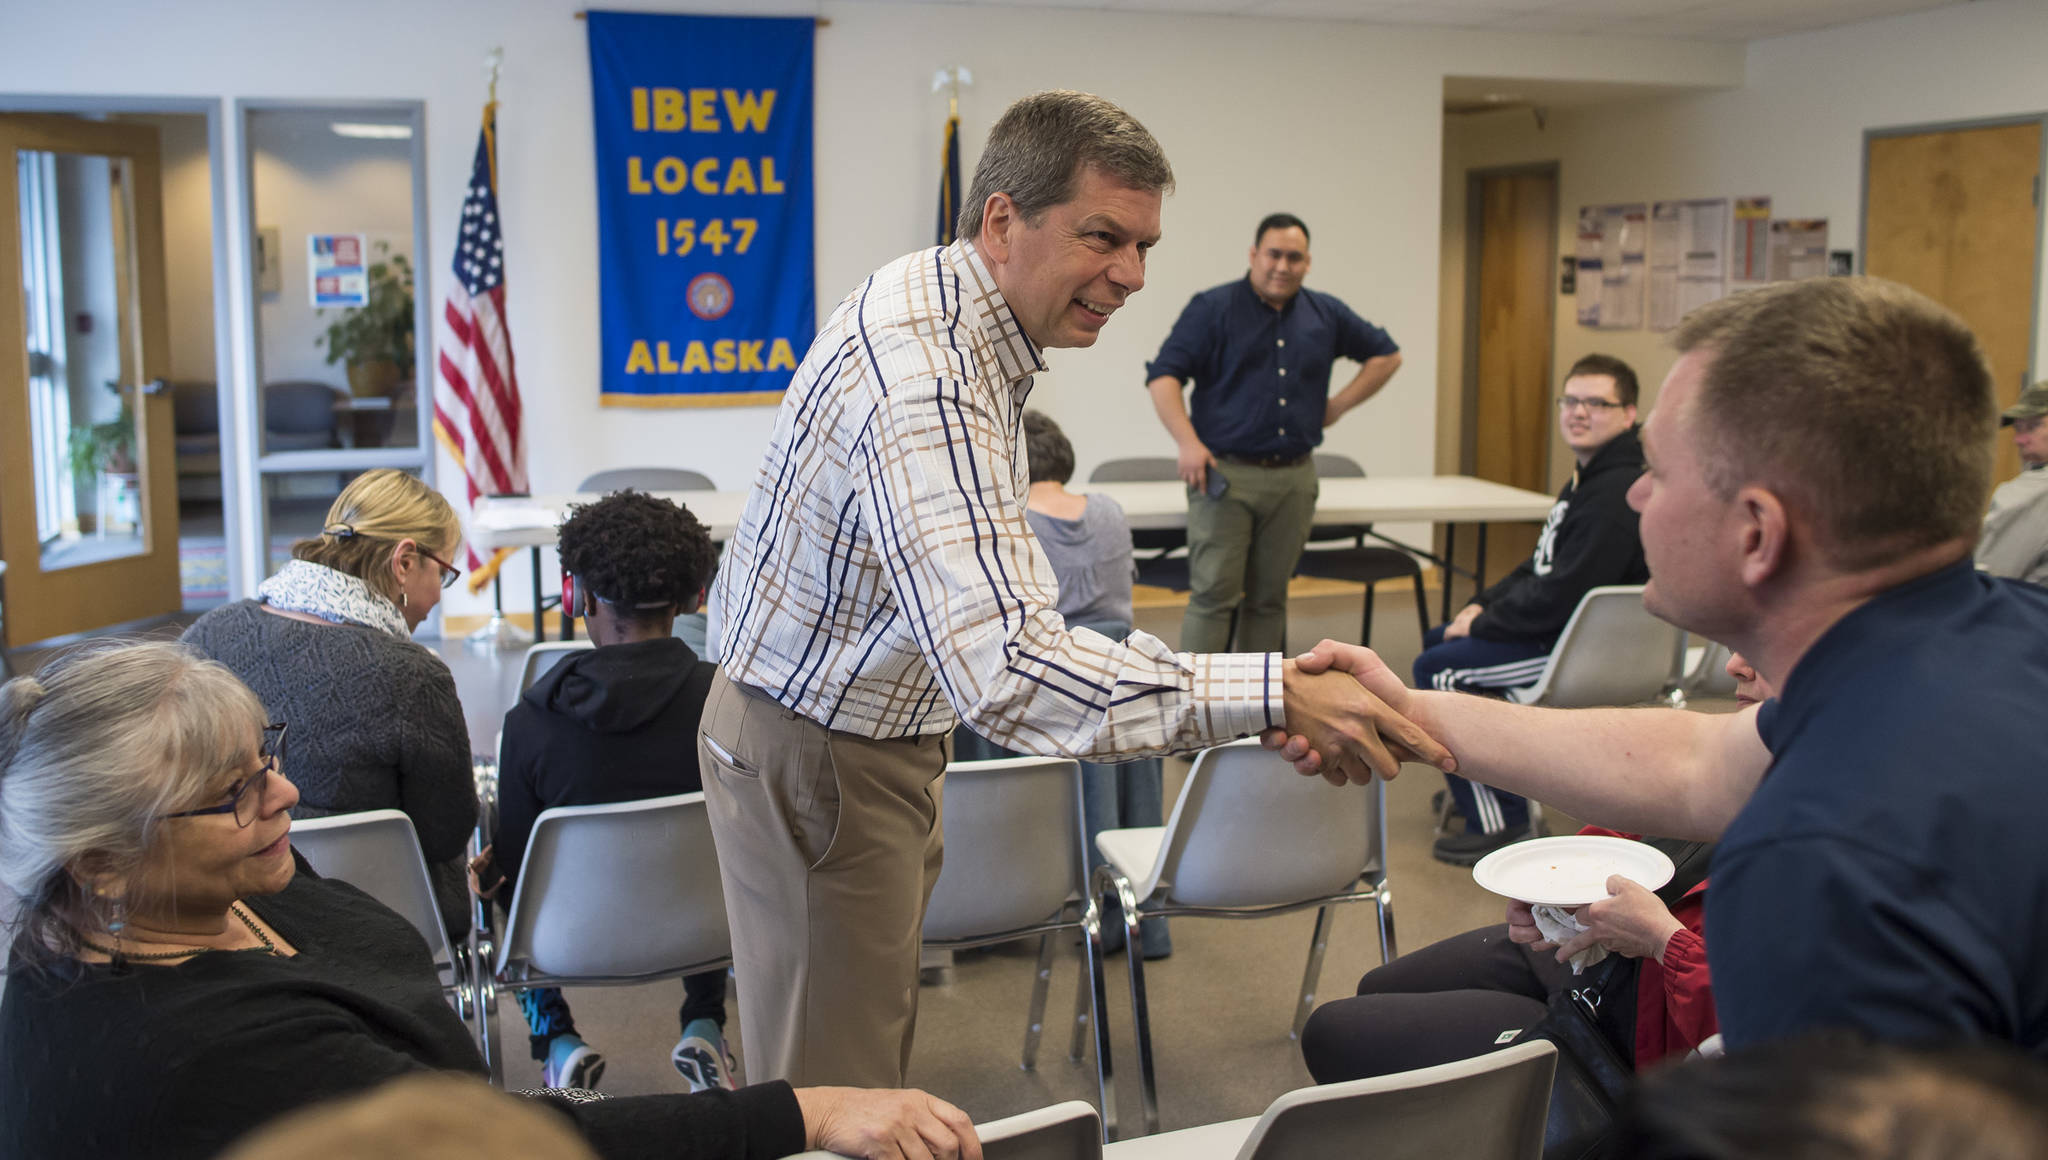 Former Alaska U.S. Senator Mark Begich greets and speaks to Juneau residents interested in his campaign for governor at the IBEW Local 1547 Union office on Thursday, June 29, 2018. (Michael Penn | Juneau Empire File)